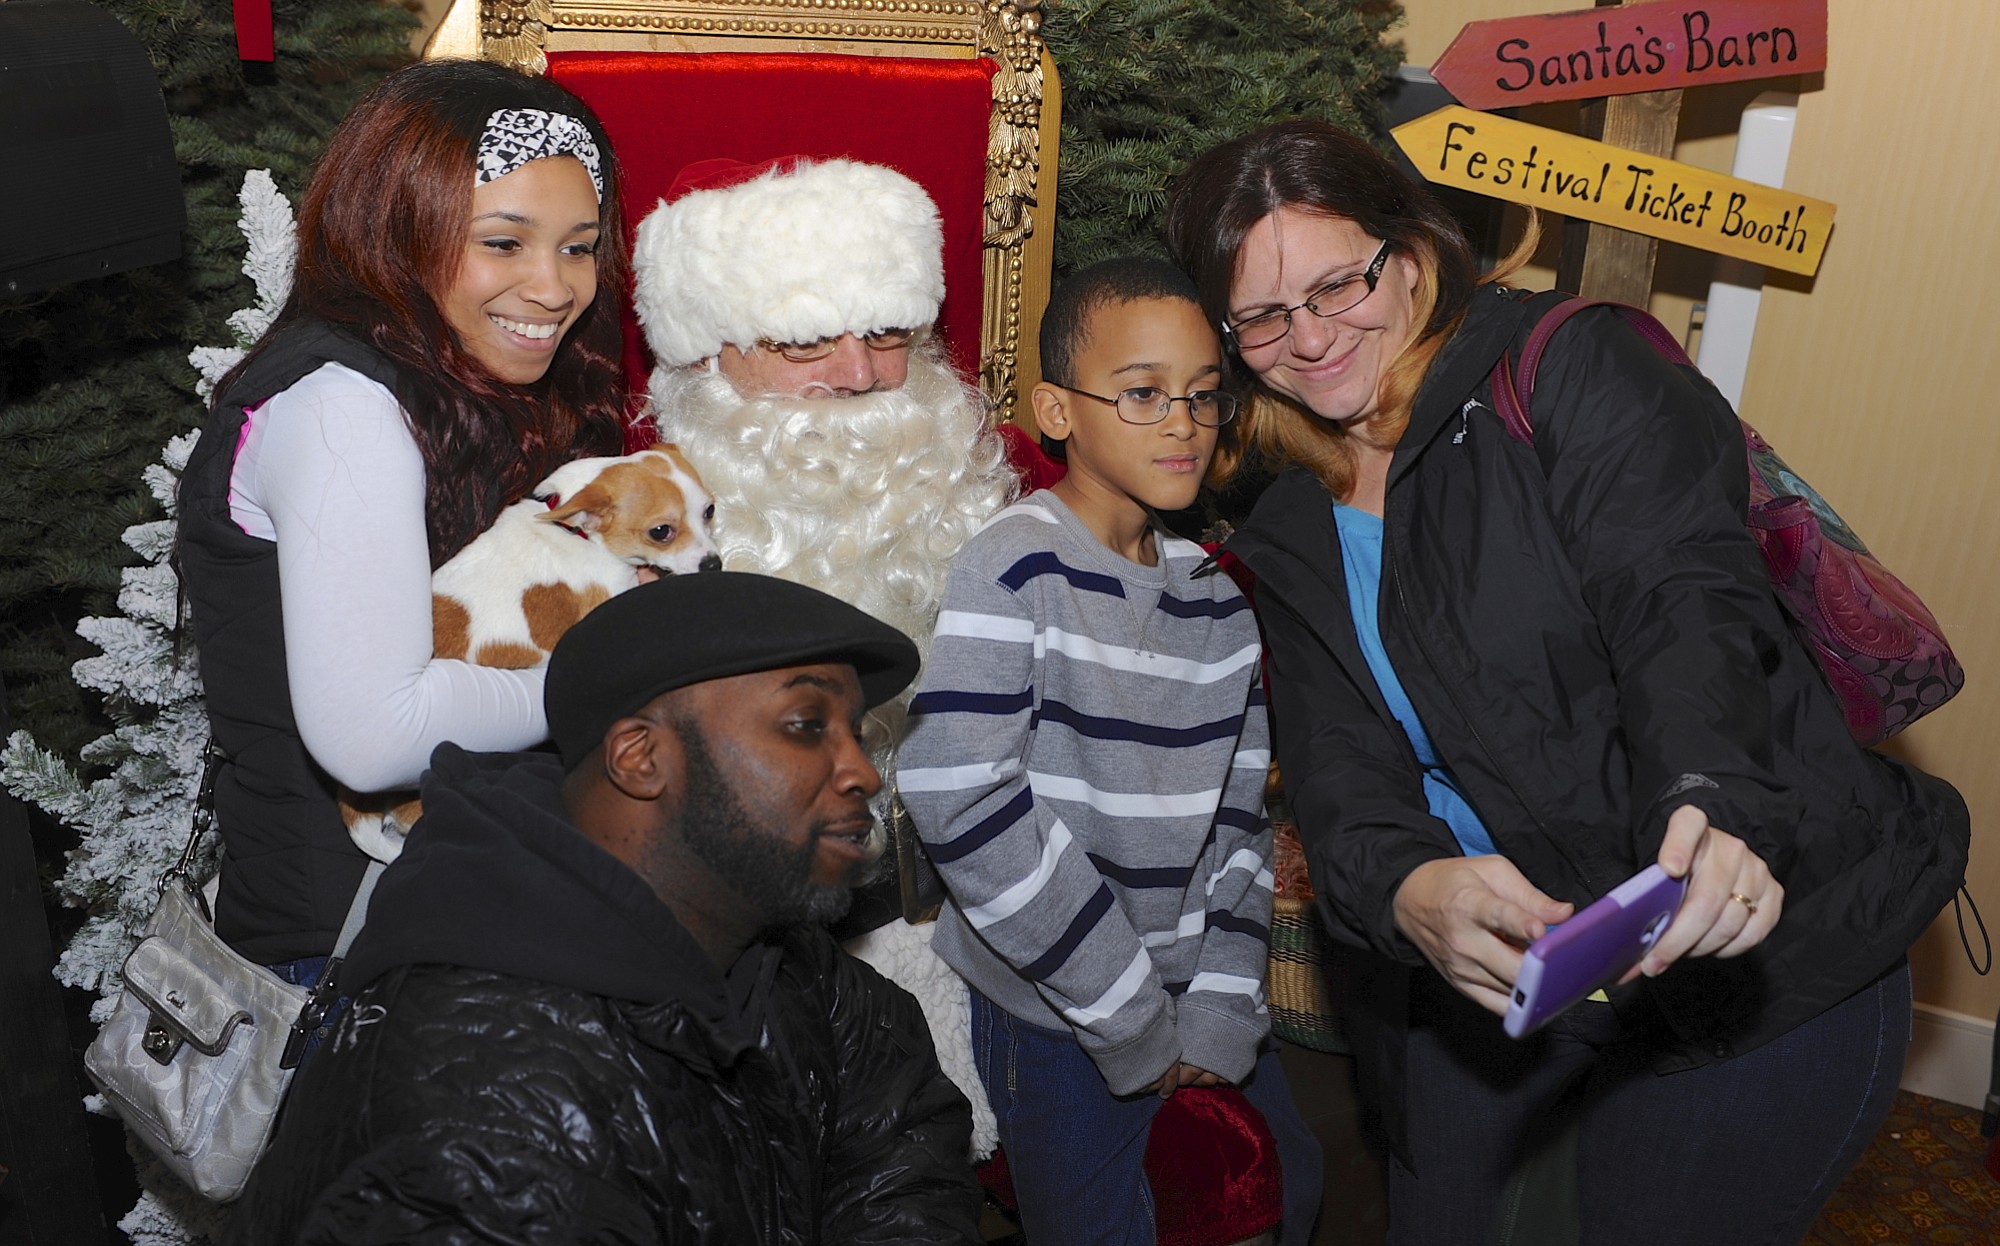 Festival of Trees
Photos by Greg Wahl-Stephens for The Columbian
Shelli Blake, right, works on getting a selfie of the family including Robert Blake, bottom left, Cash? Blake, left, with her dog Peewee and Trevon Blake as they visit with Santa at the Festival of Trees at the Hilton Vancouver Washington in downtown.